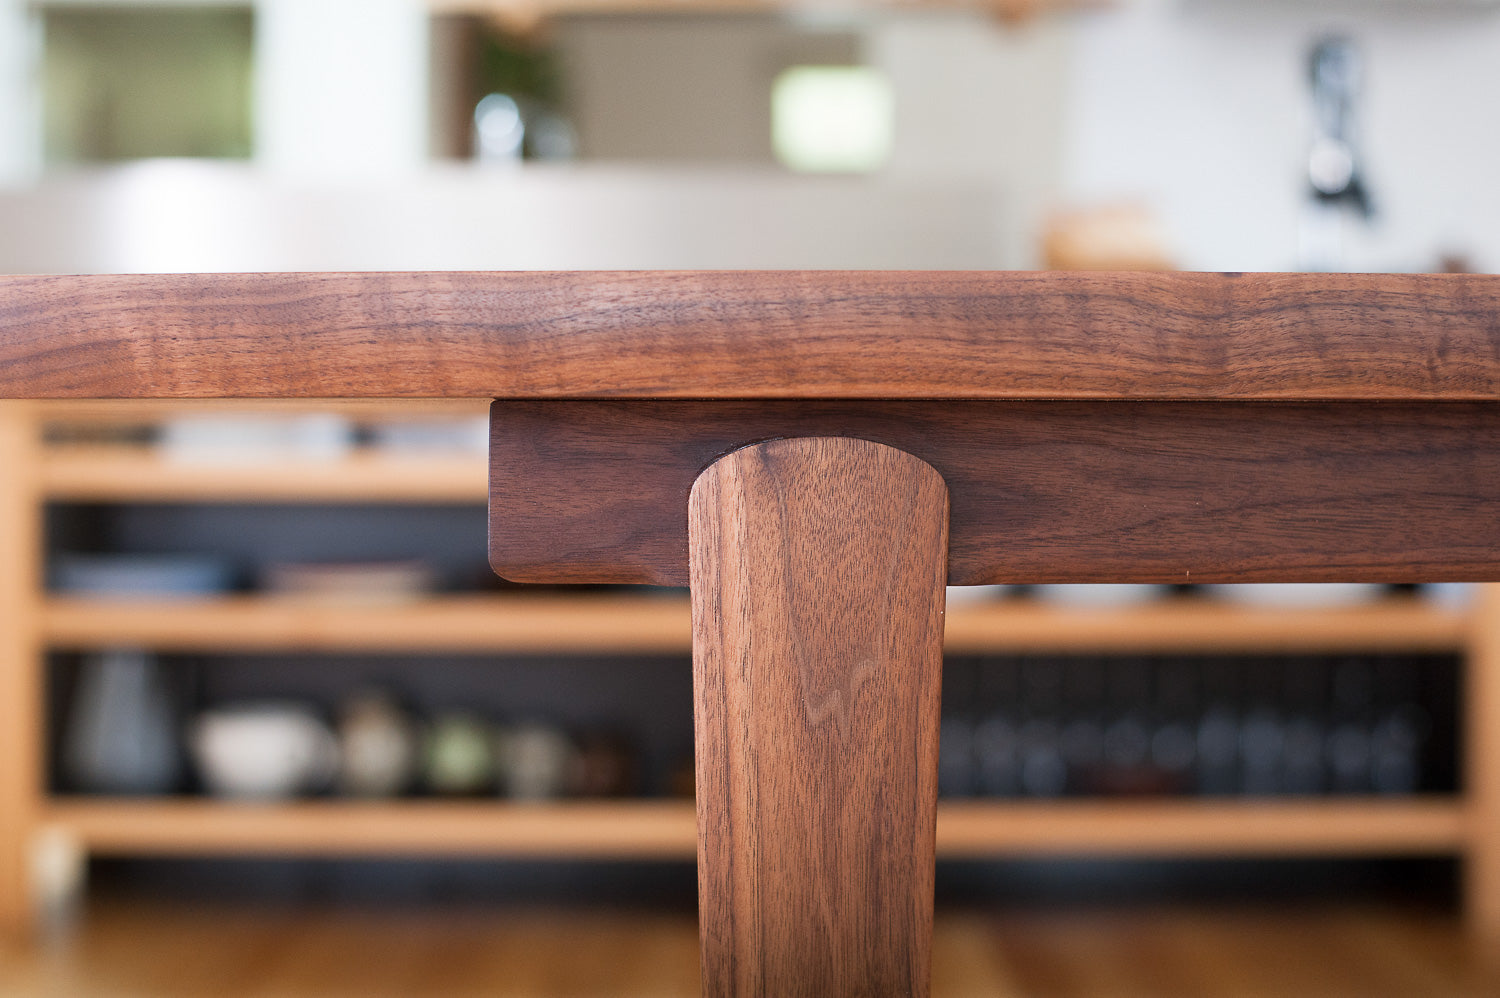 Wesley Dining Table in Walnut - detailed view of leg joinery. Designed and made by Hey, Porter.